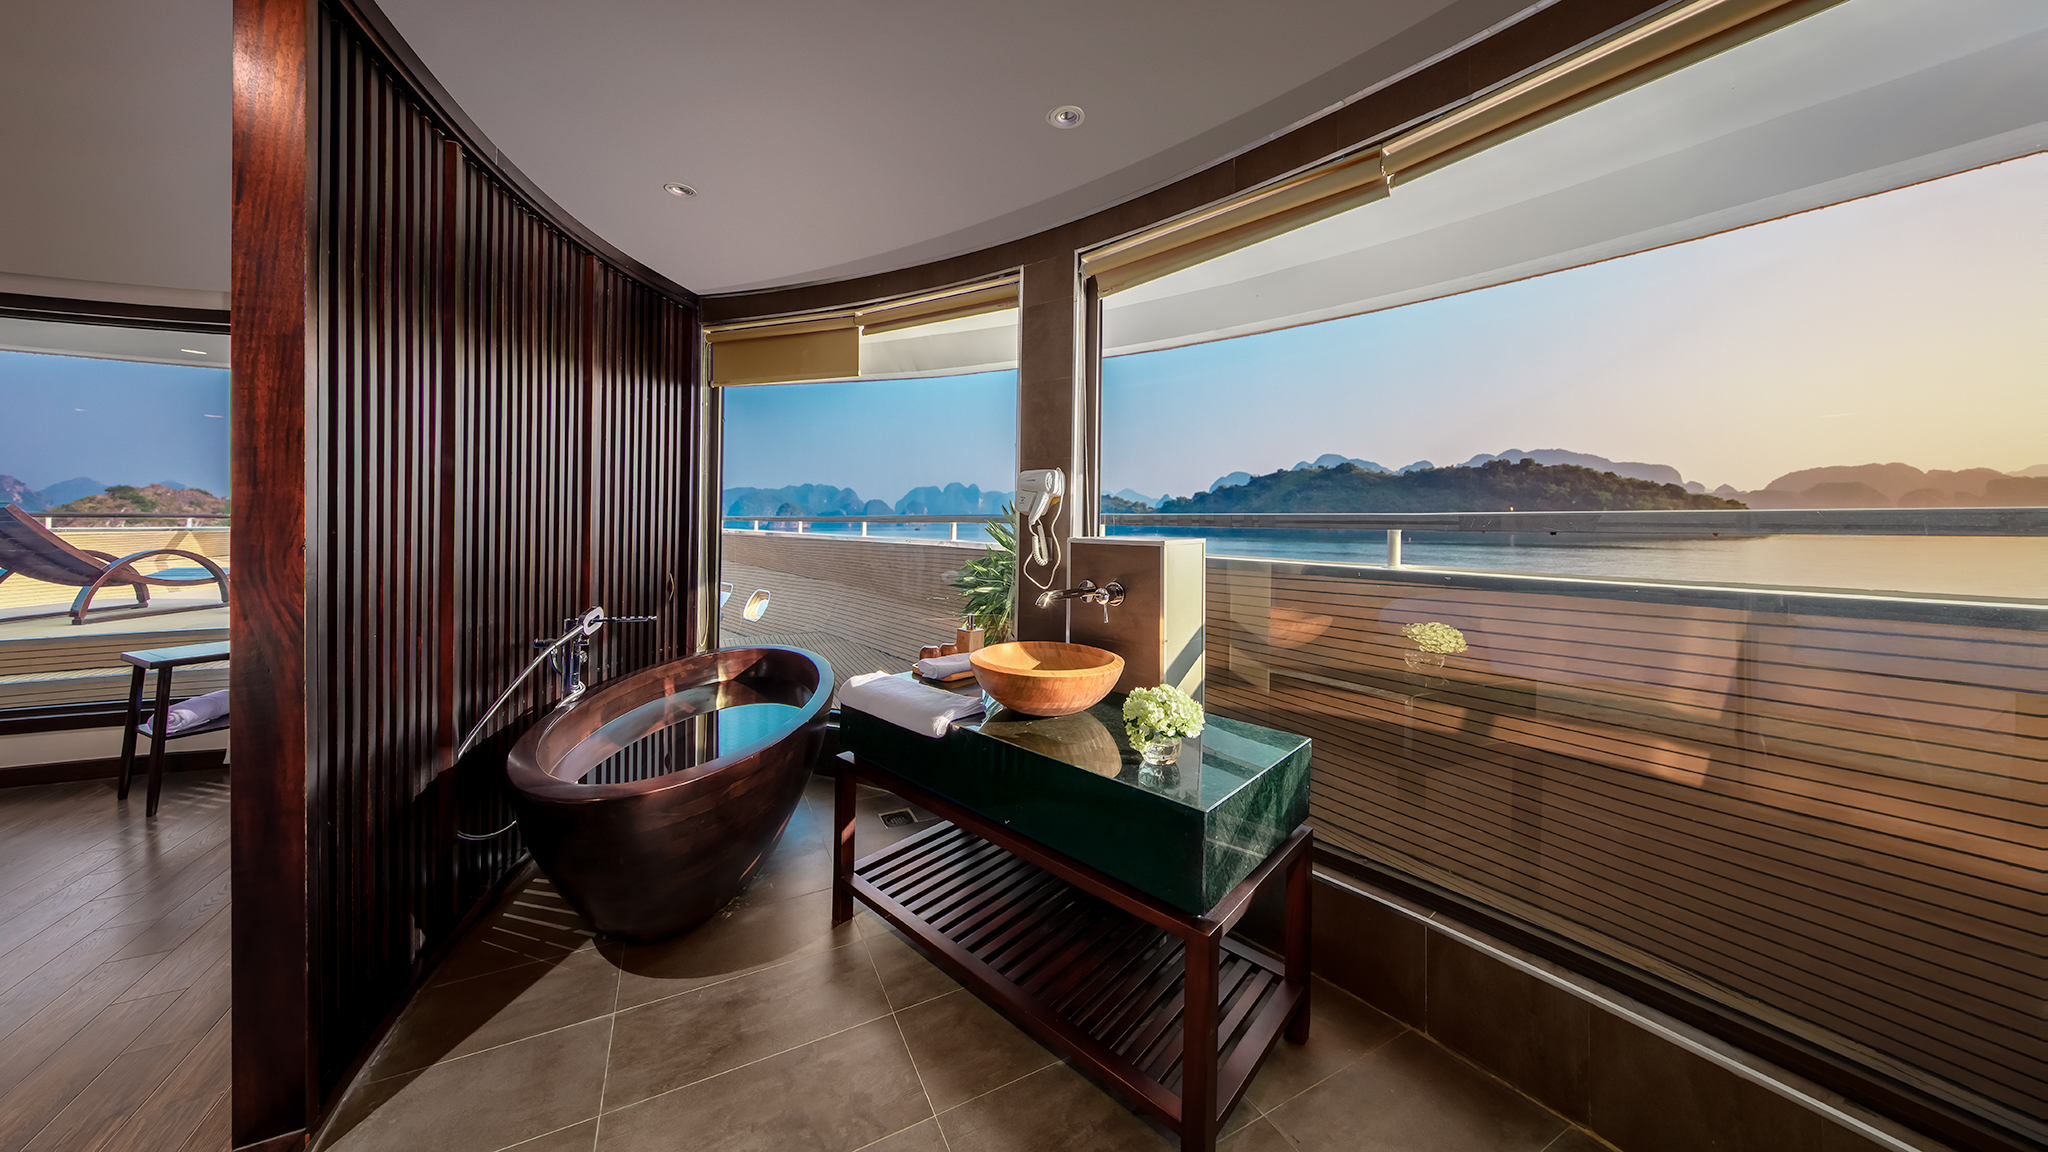 Panorama view from wooden bathtub